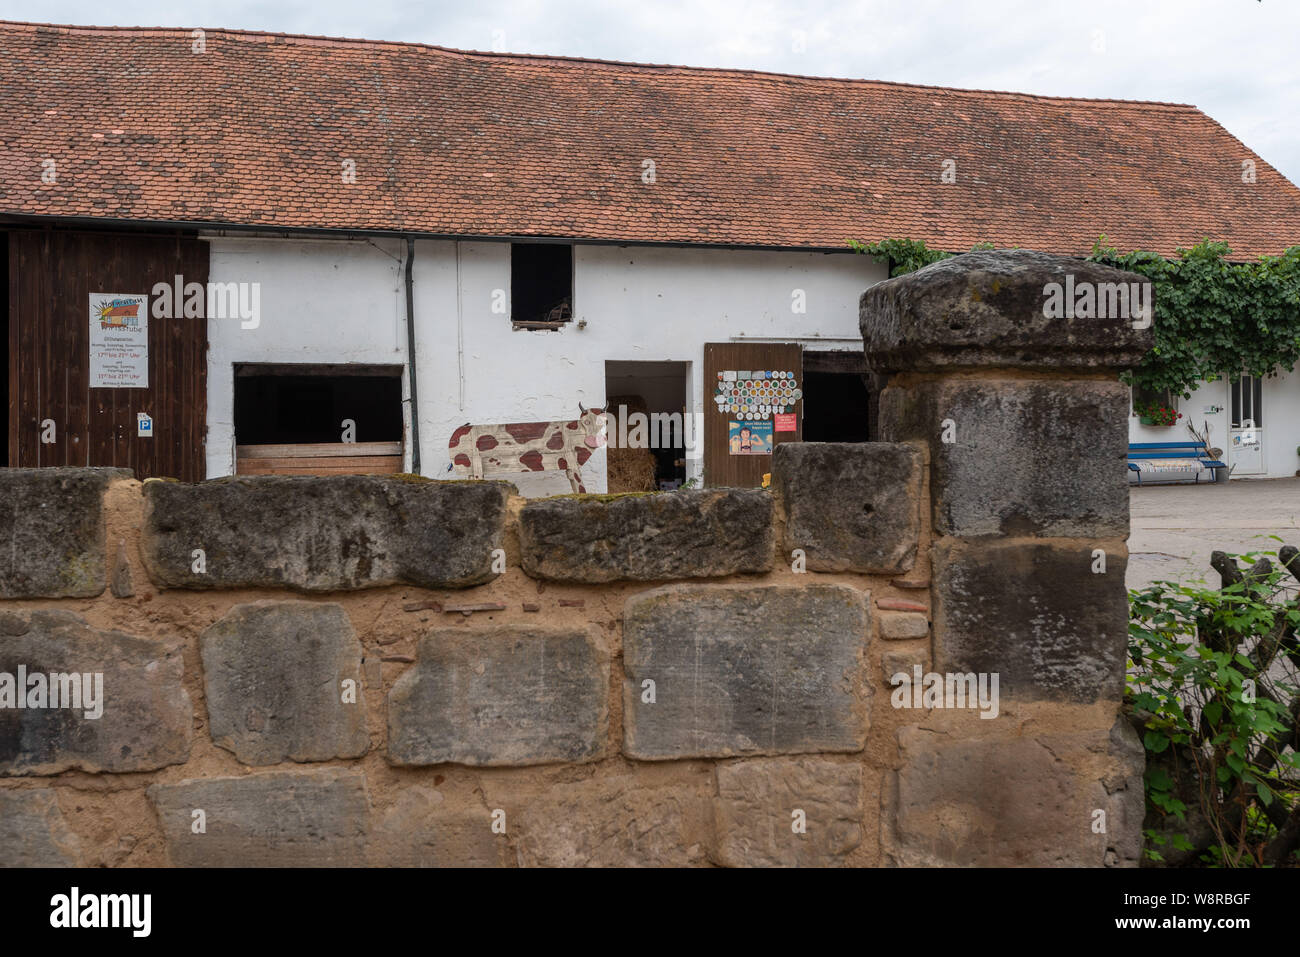 Moehrendorf, Germany - August 9, 2019: View of a cowshed in Moehrendorf, Germany. Stock Photo